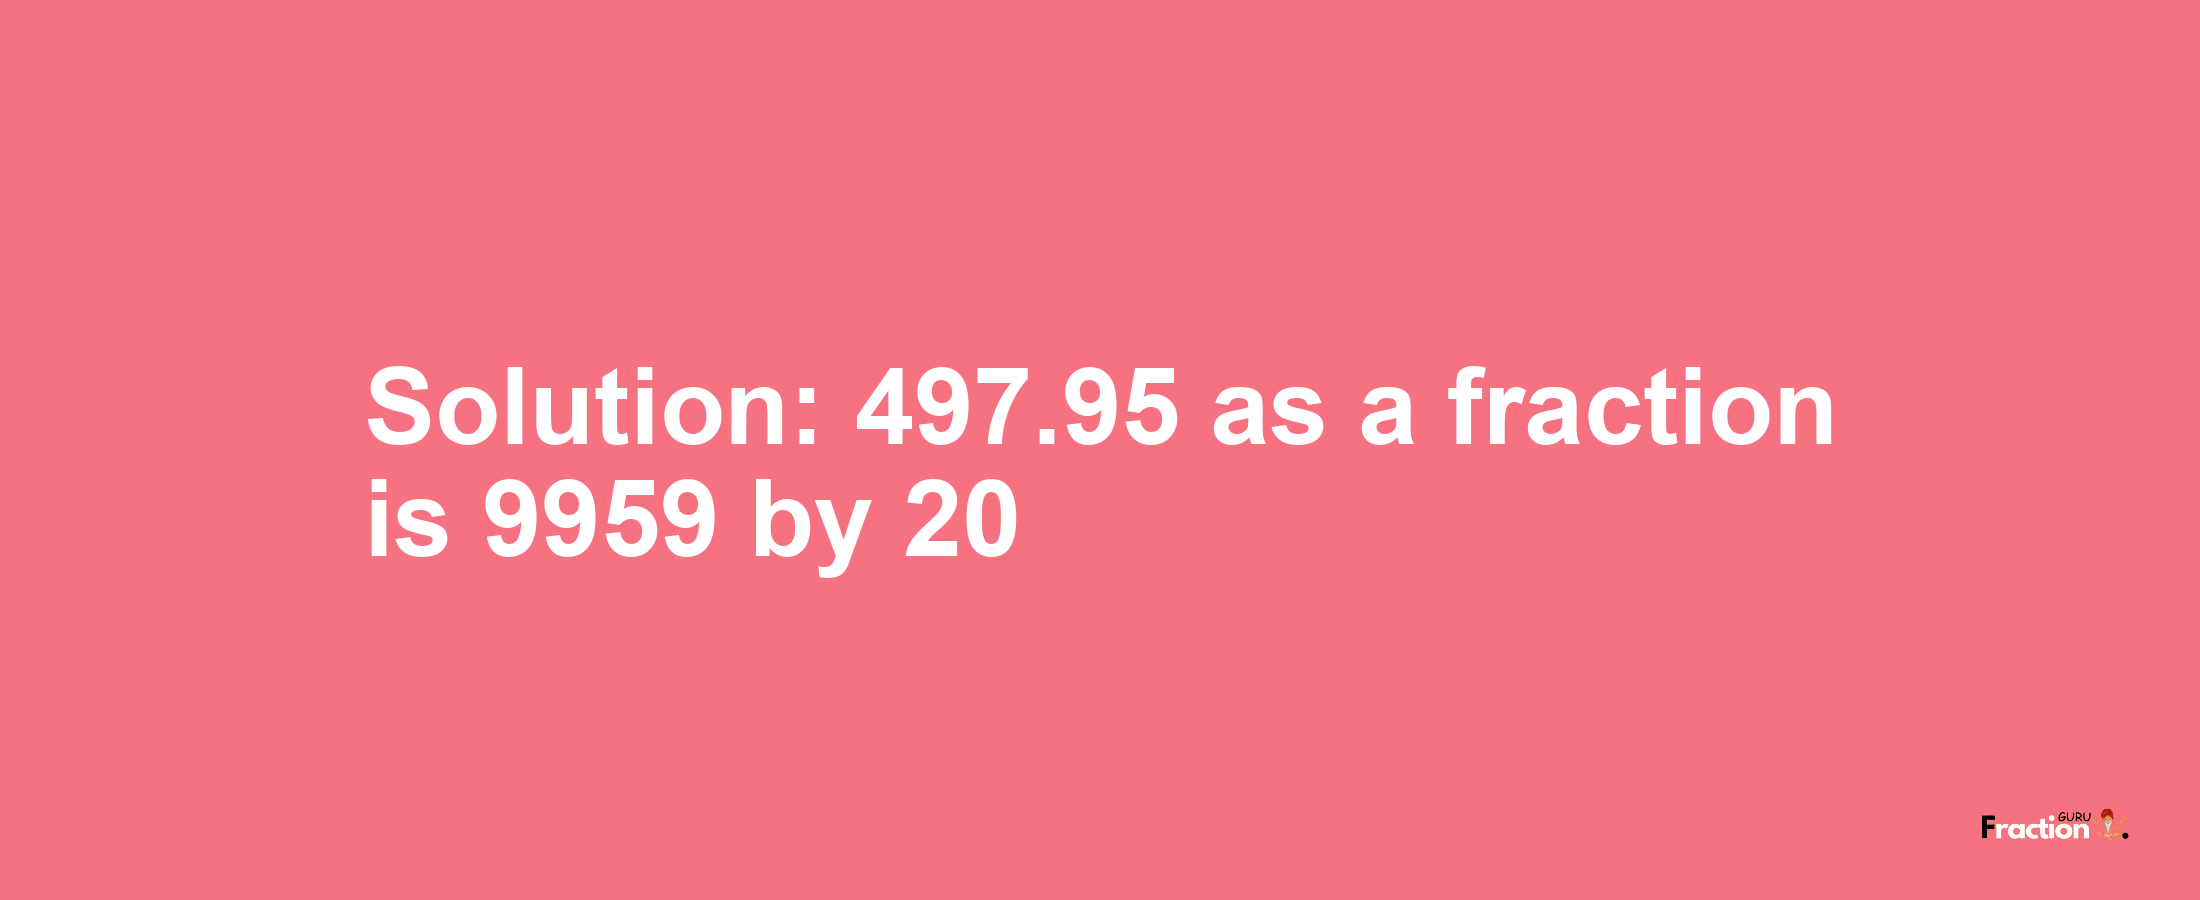 Solution:497.95 as a fraction is 9959/20